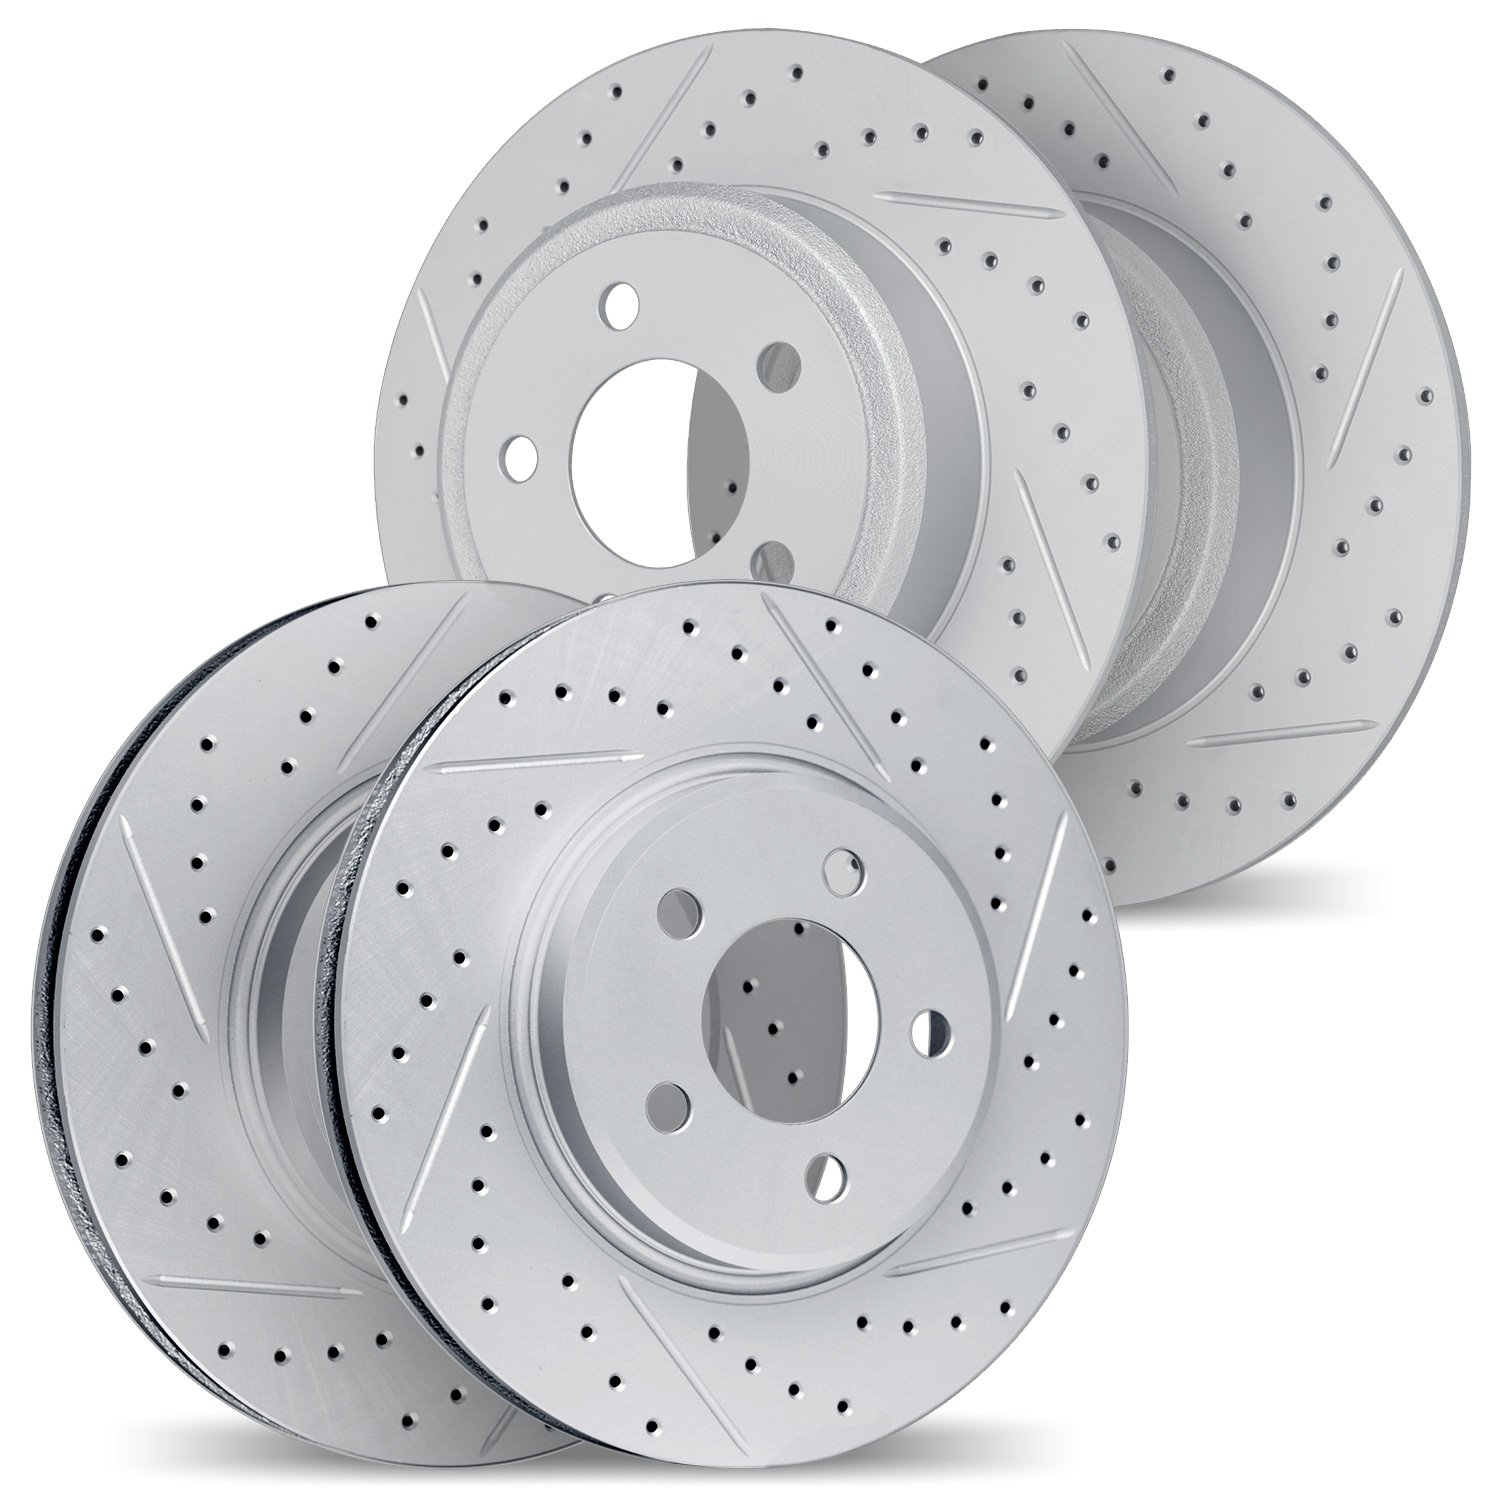 2004-59015 Geoperformance Drilled/Slotted Brake Rotors, 2002-2006 Acura/Honda, Position: Front and Rear